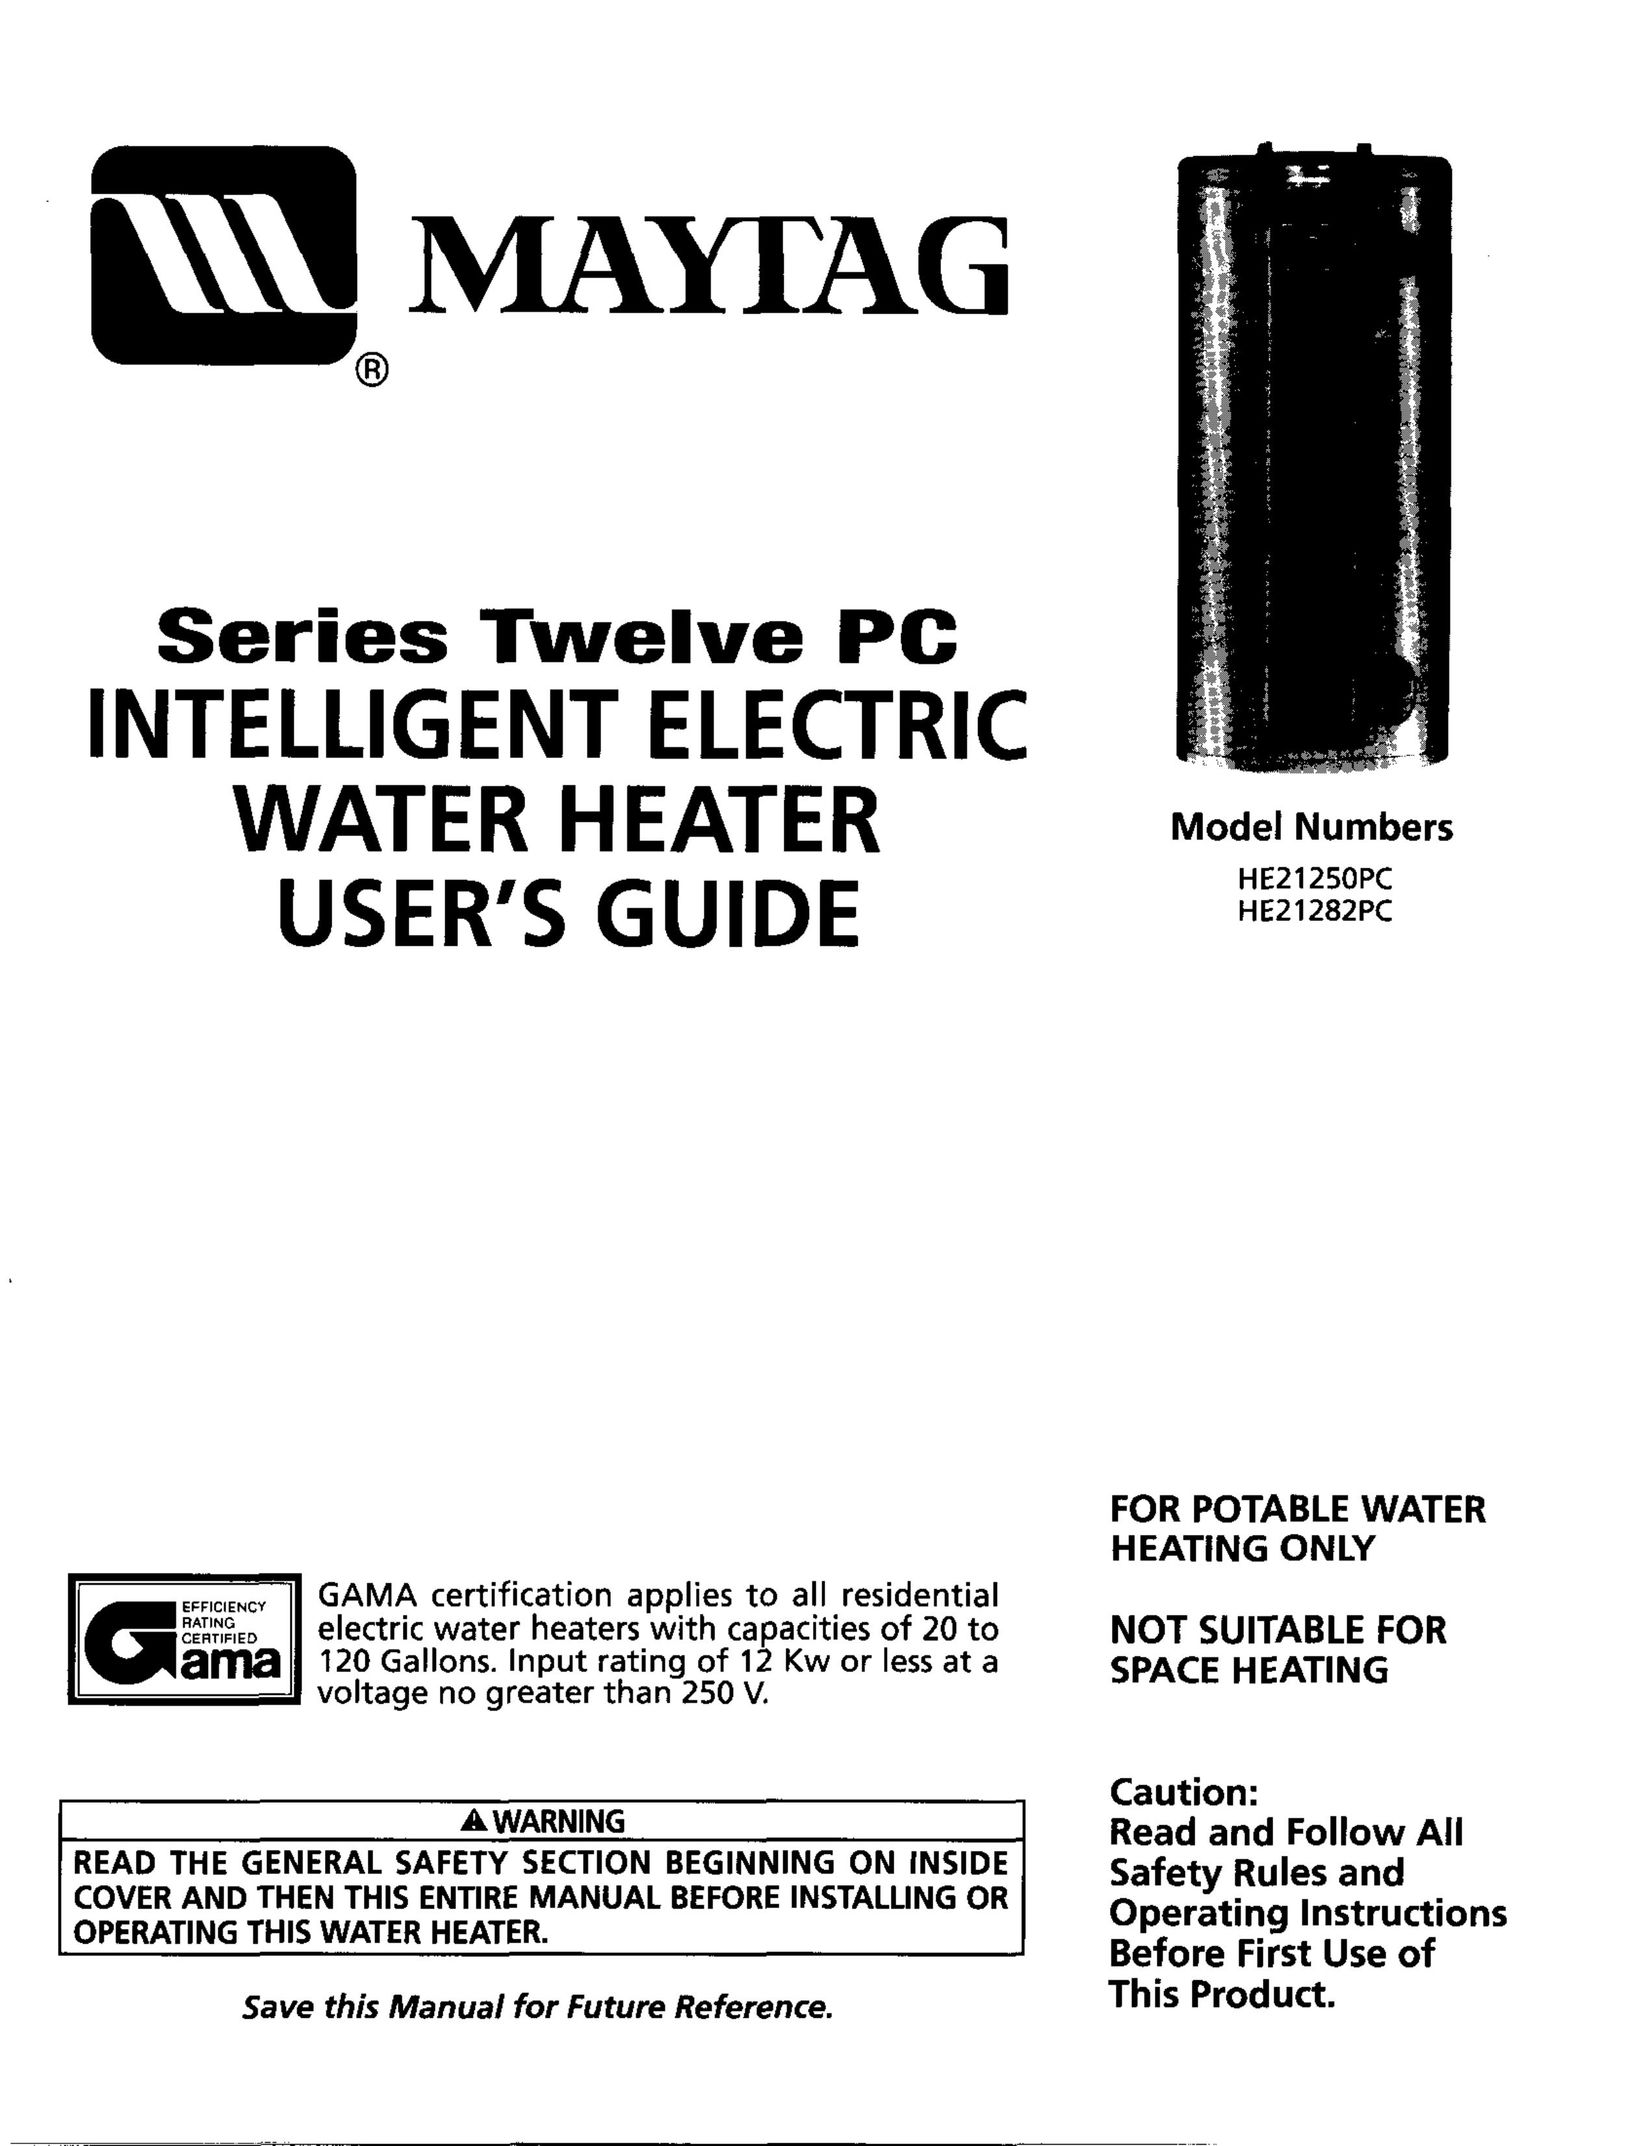 Maytag HE21282PC Water Heater User Manual